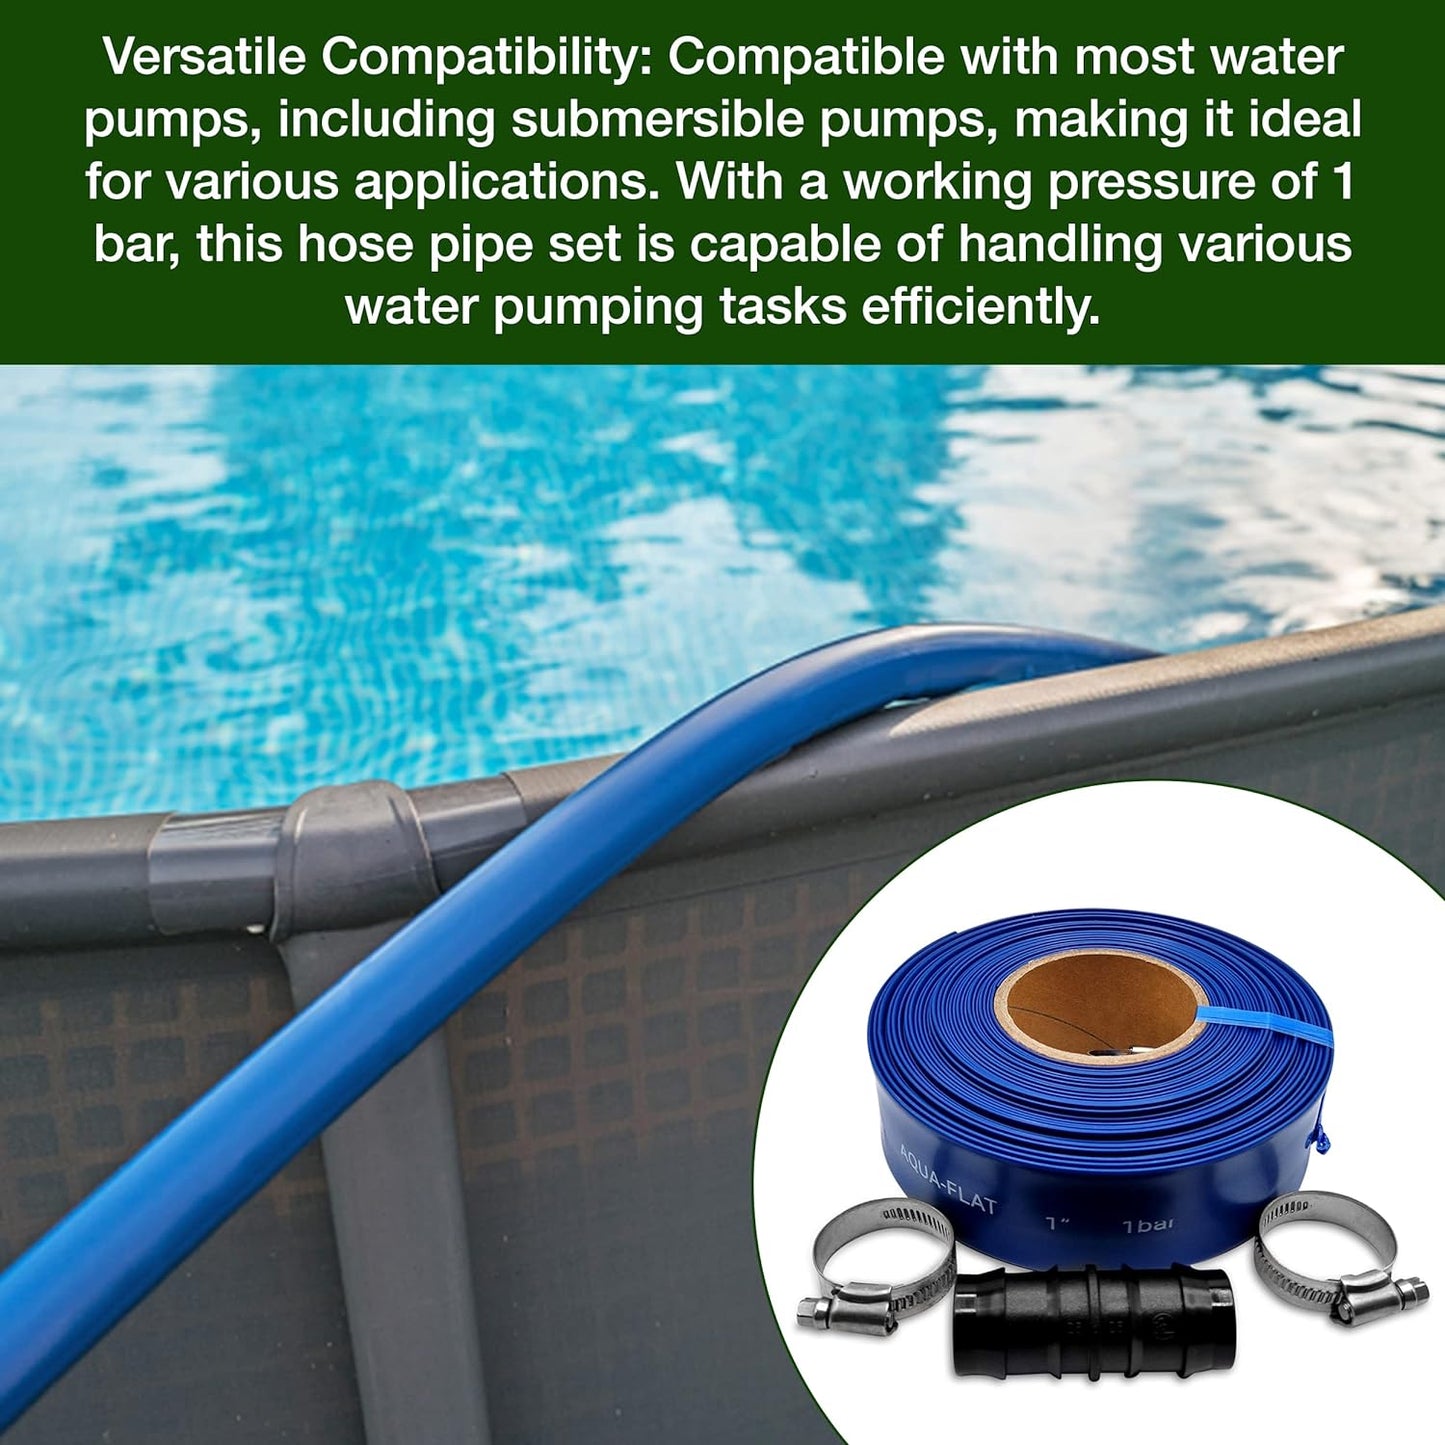 Ultimate Layflat Discharge Hose Pipe Set - 10m x 25mm Diameter, Complete with 2 Clips, Joiner Coupler, and Pond Connector for use with Submersible & Other Water Pumps